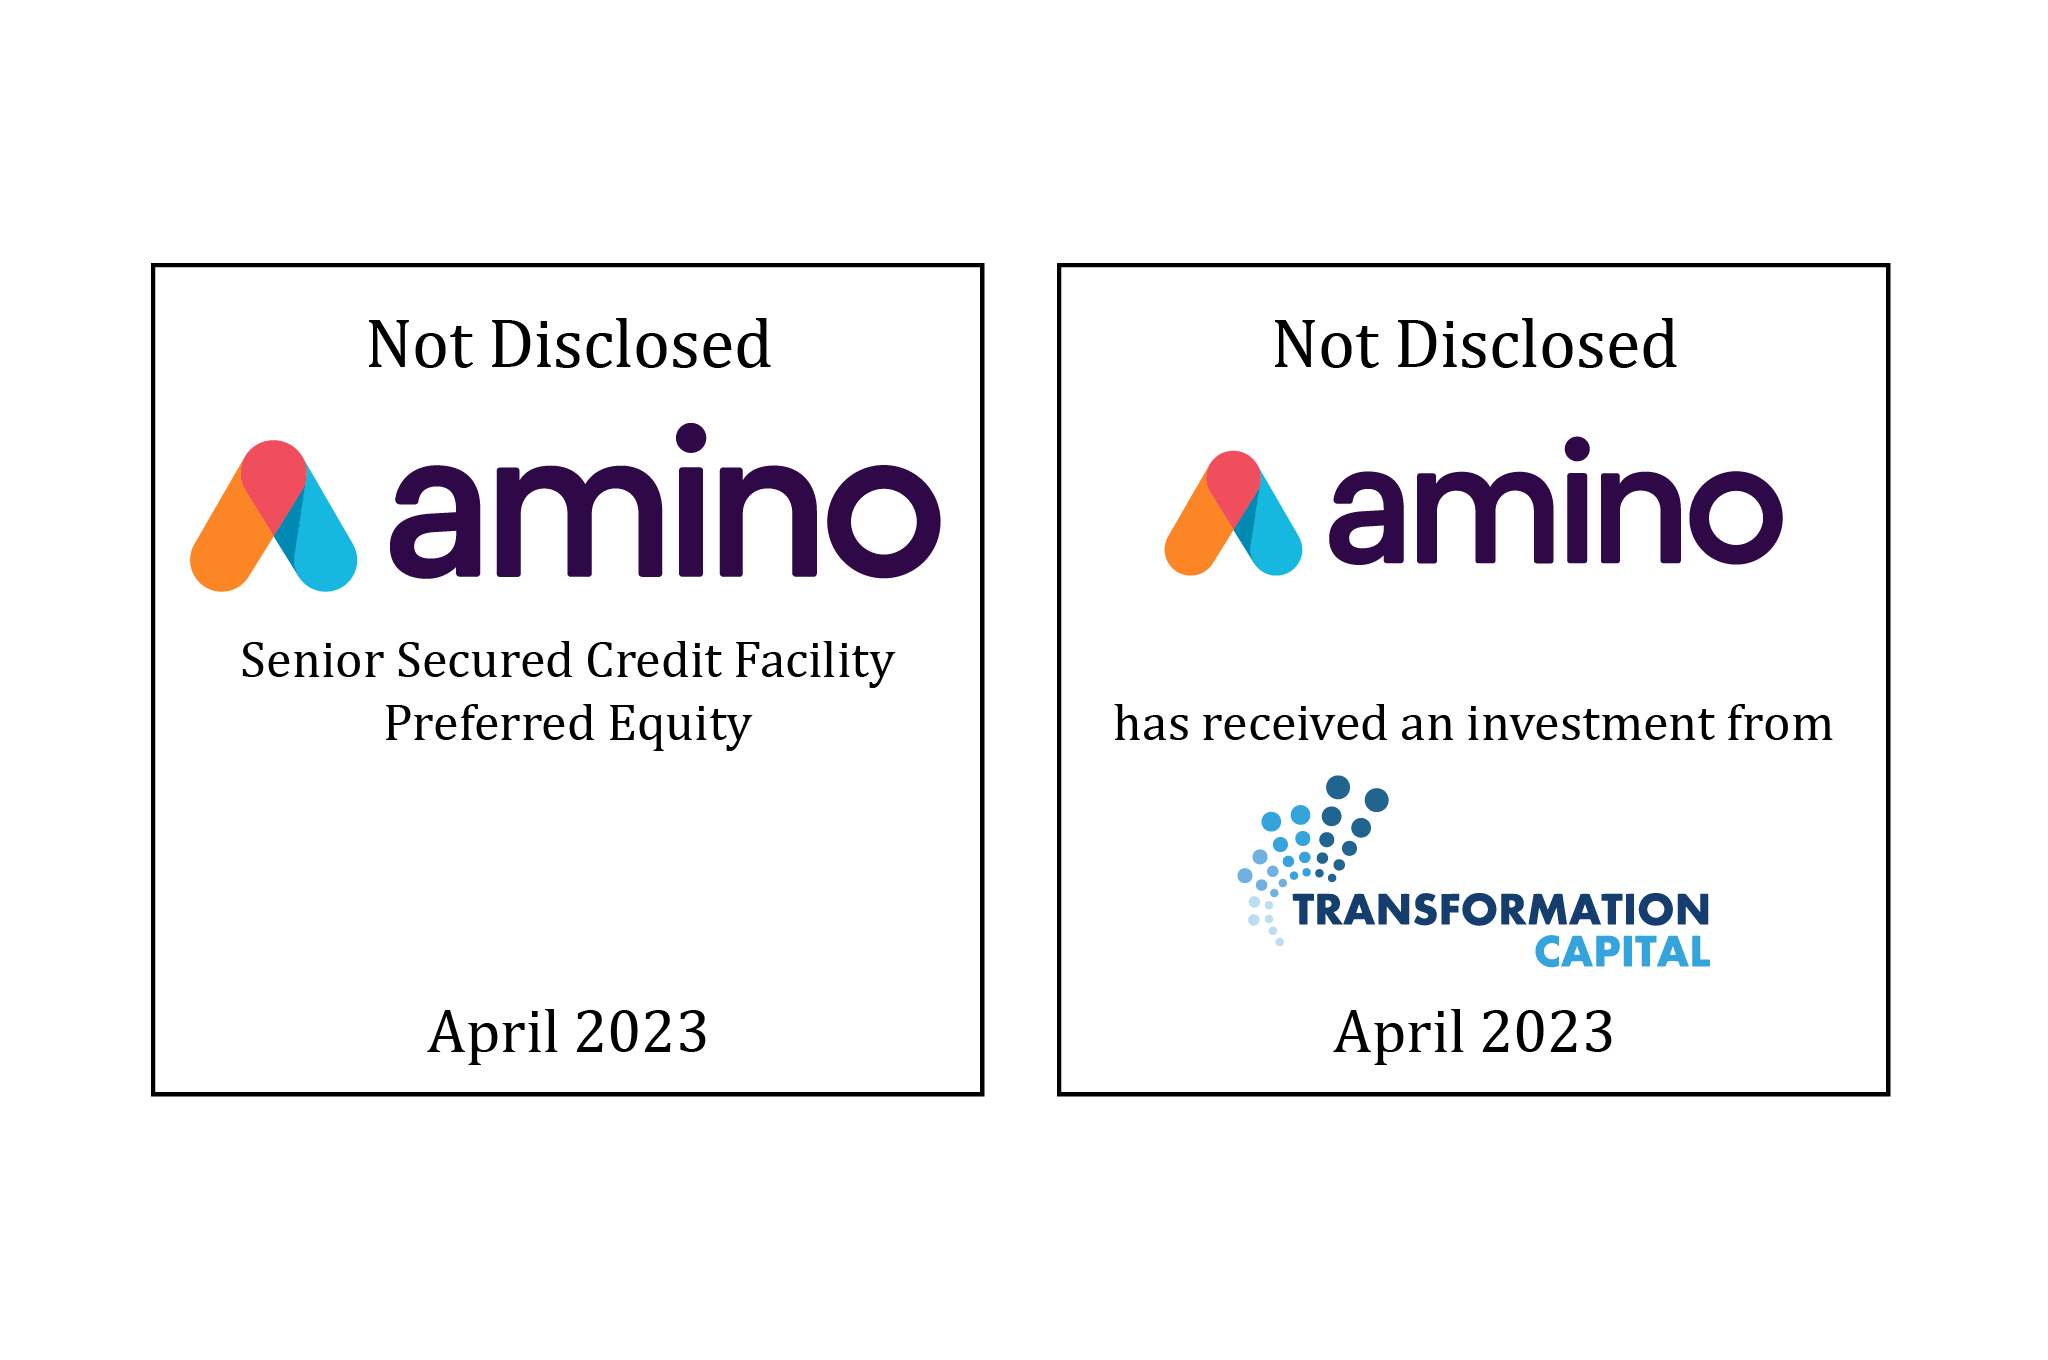 Amino Senior Secured Credit Facility Preferred Equity tombstone and Amino/Transformation Capital tombstone